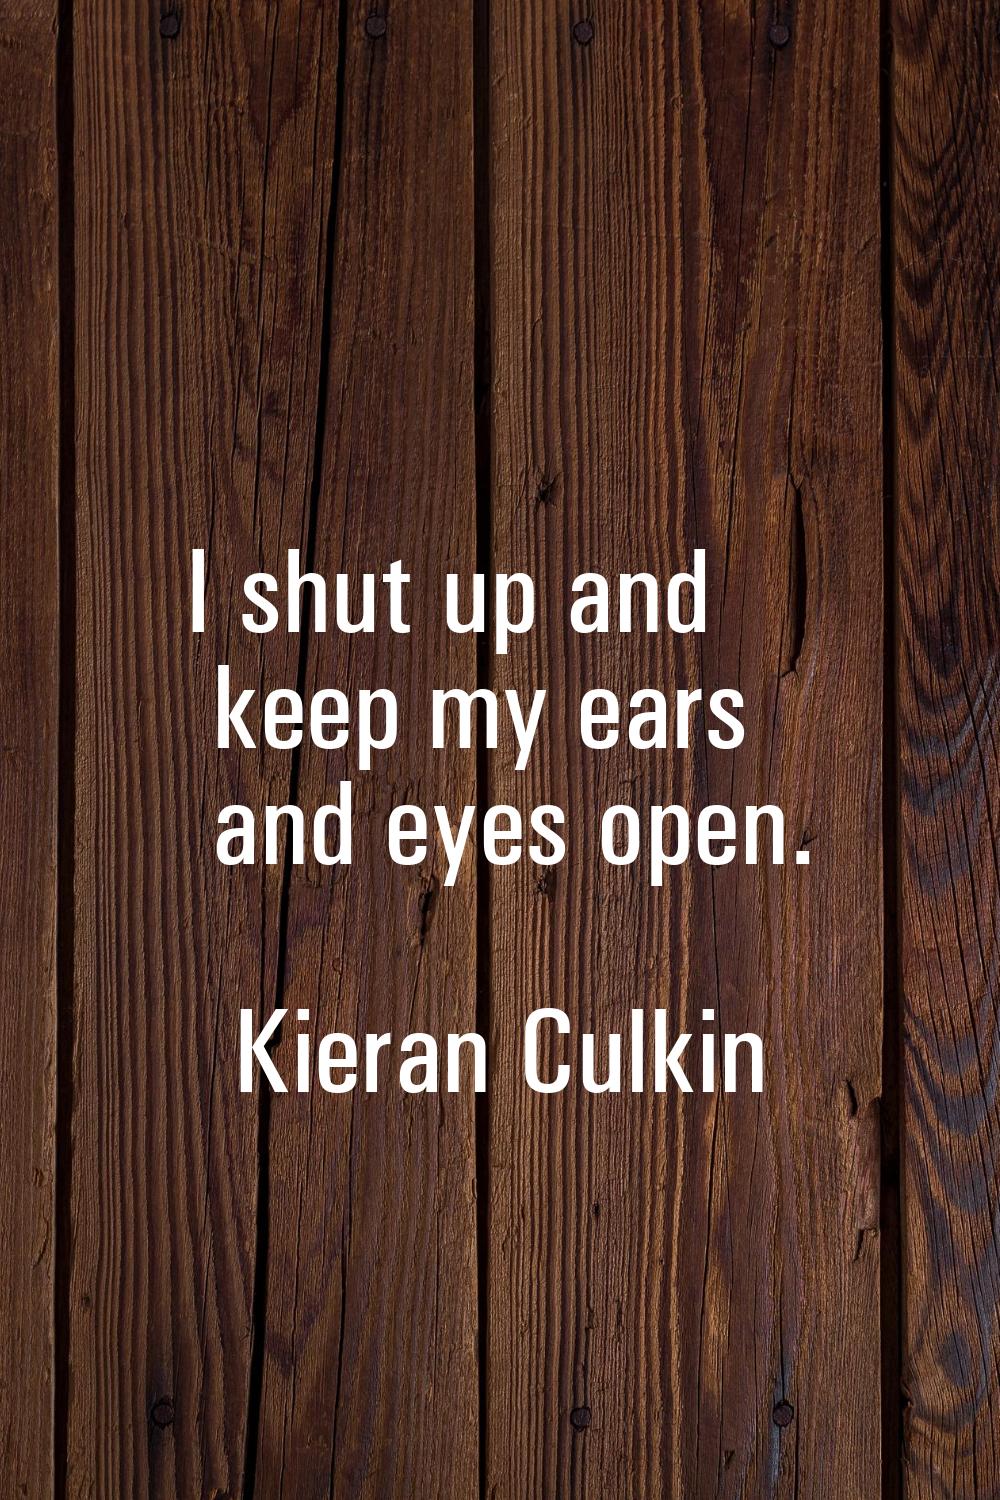 I shut up and keep my ears and eyes open.